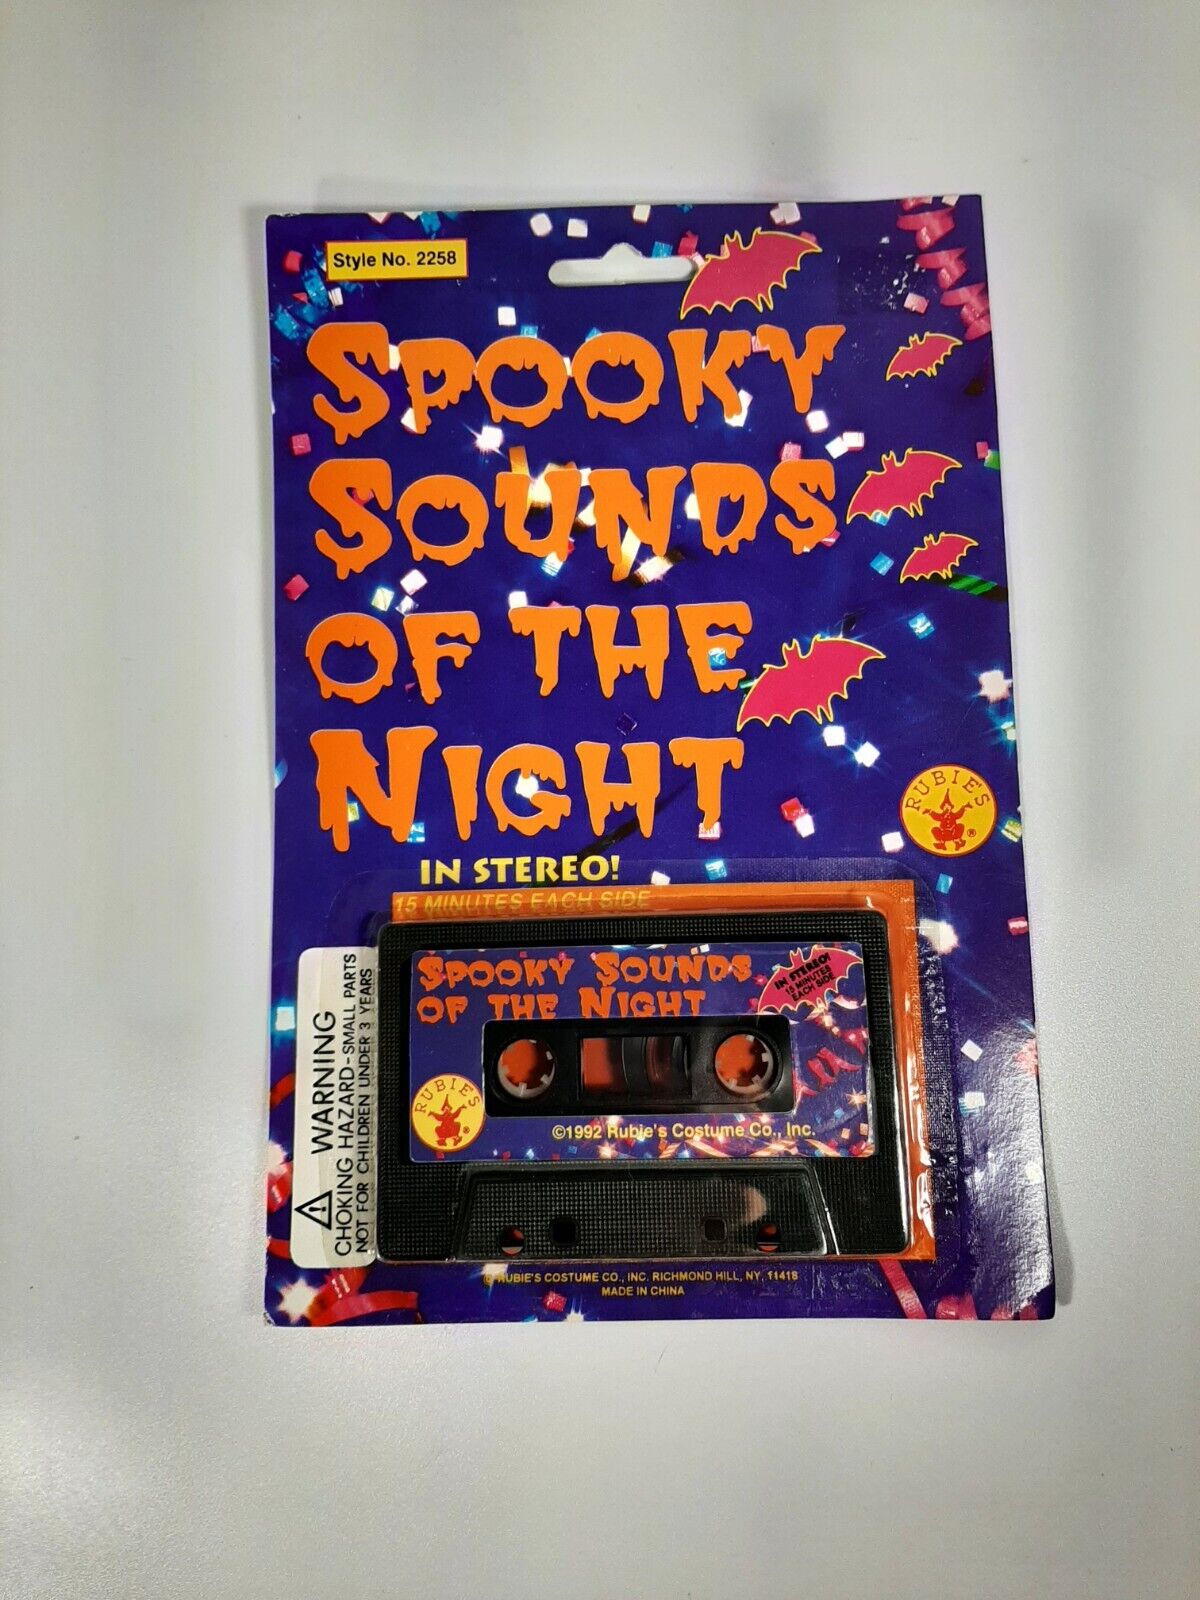 Vintage 1992 Rubies Costume Spooky Sounds Of The Night Cassette Tape New